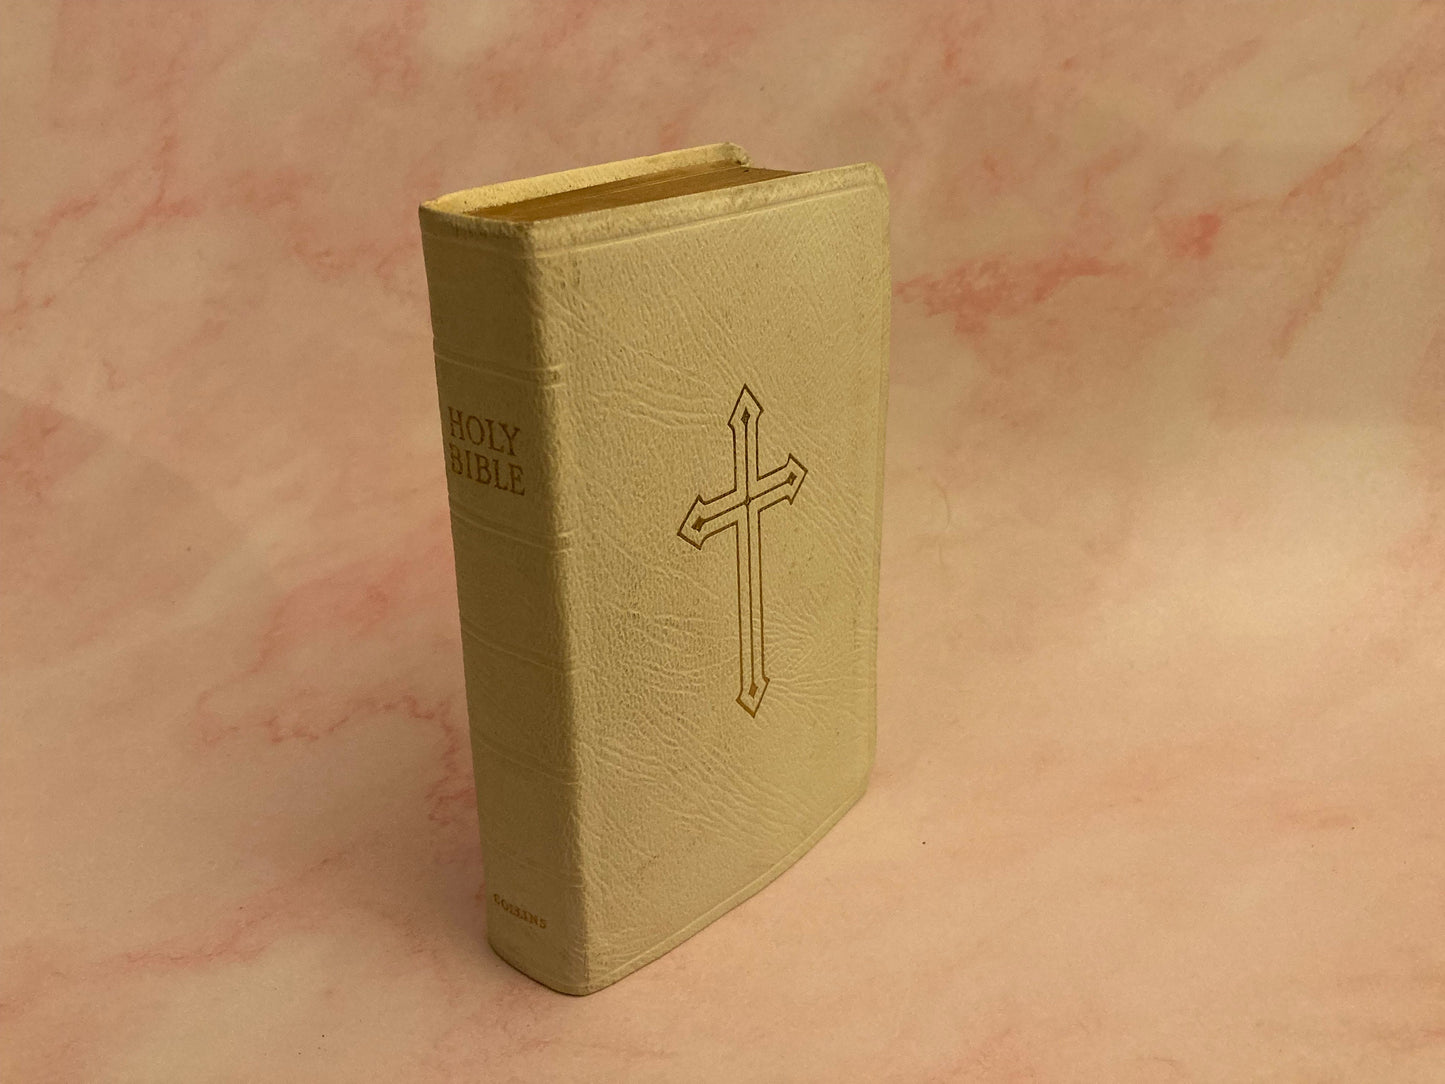 Vintage KJV white Bible with Gold edge pages - (Ref x193)